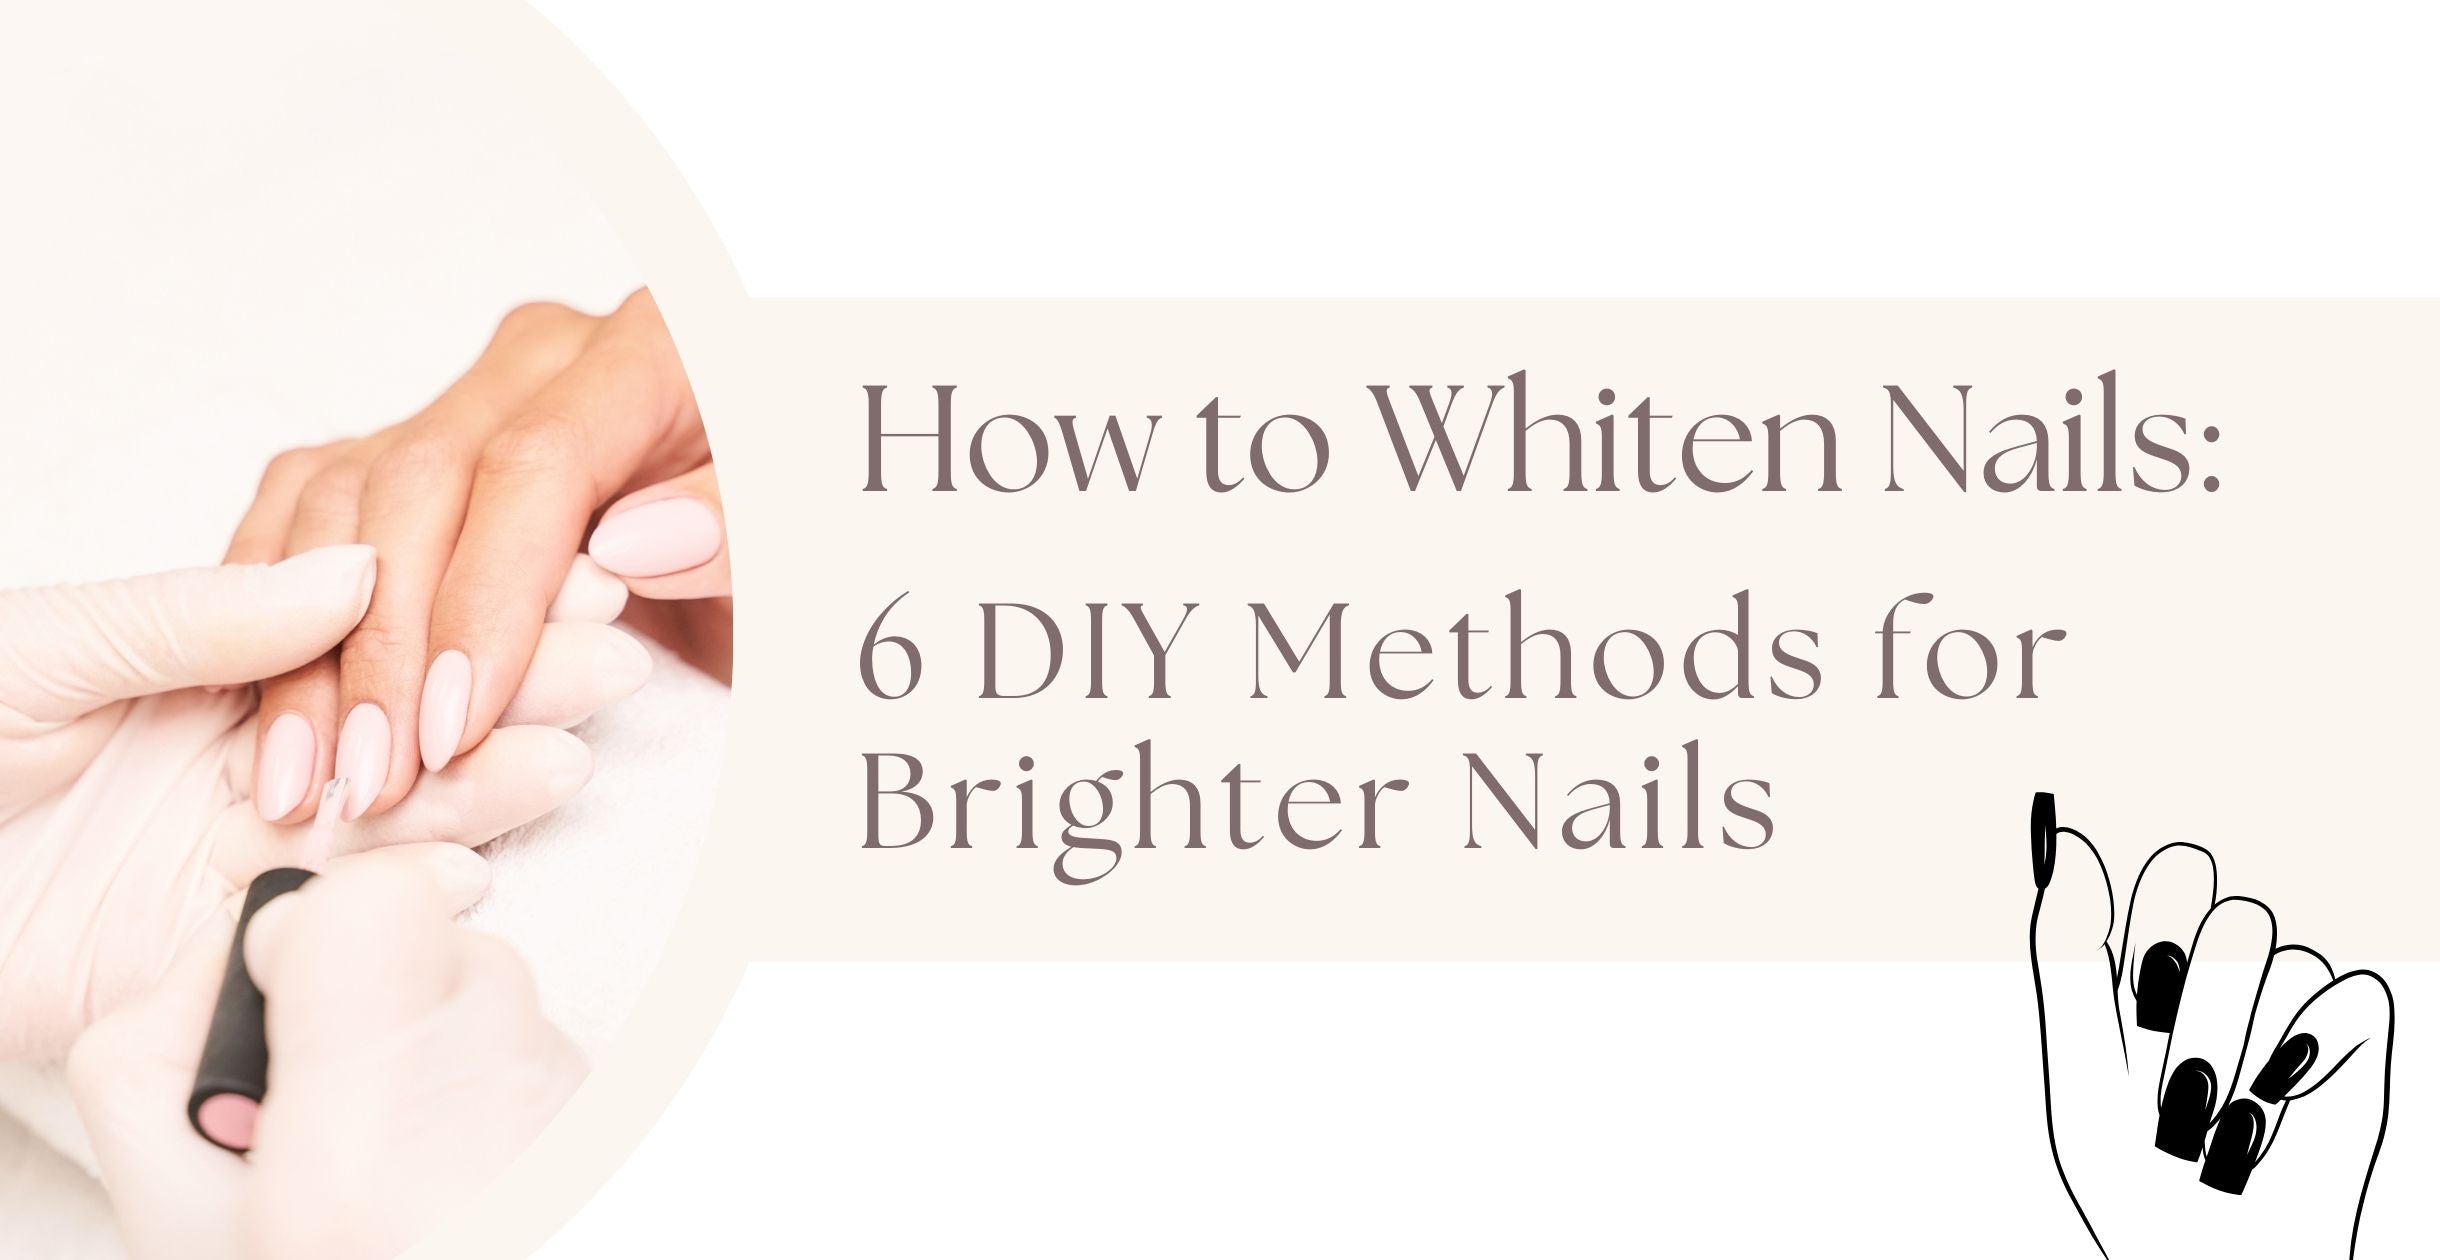 How to Whiten Nails